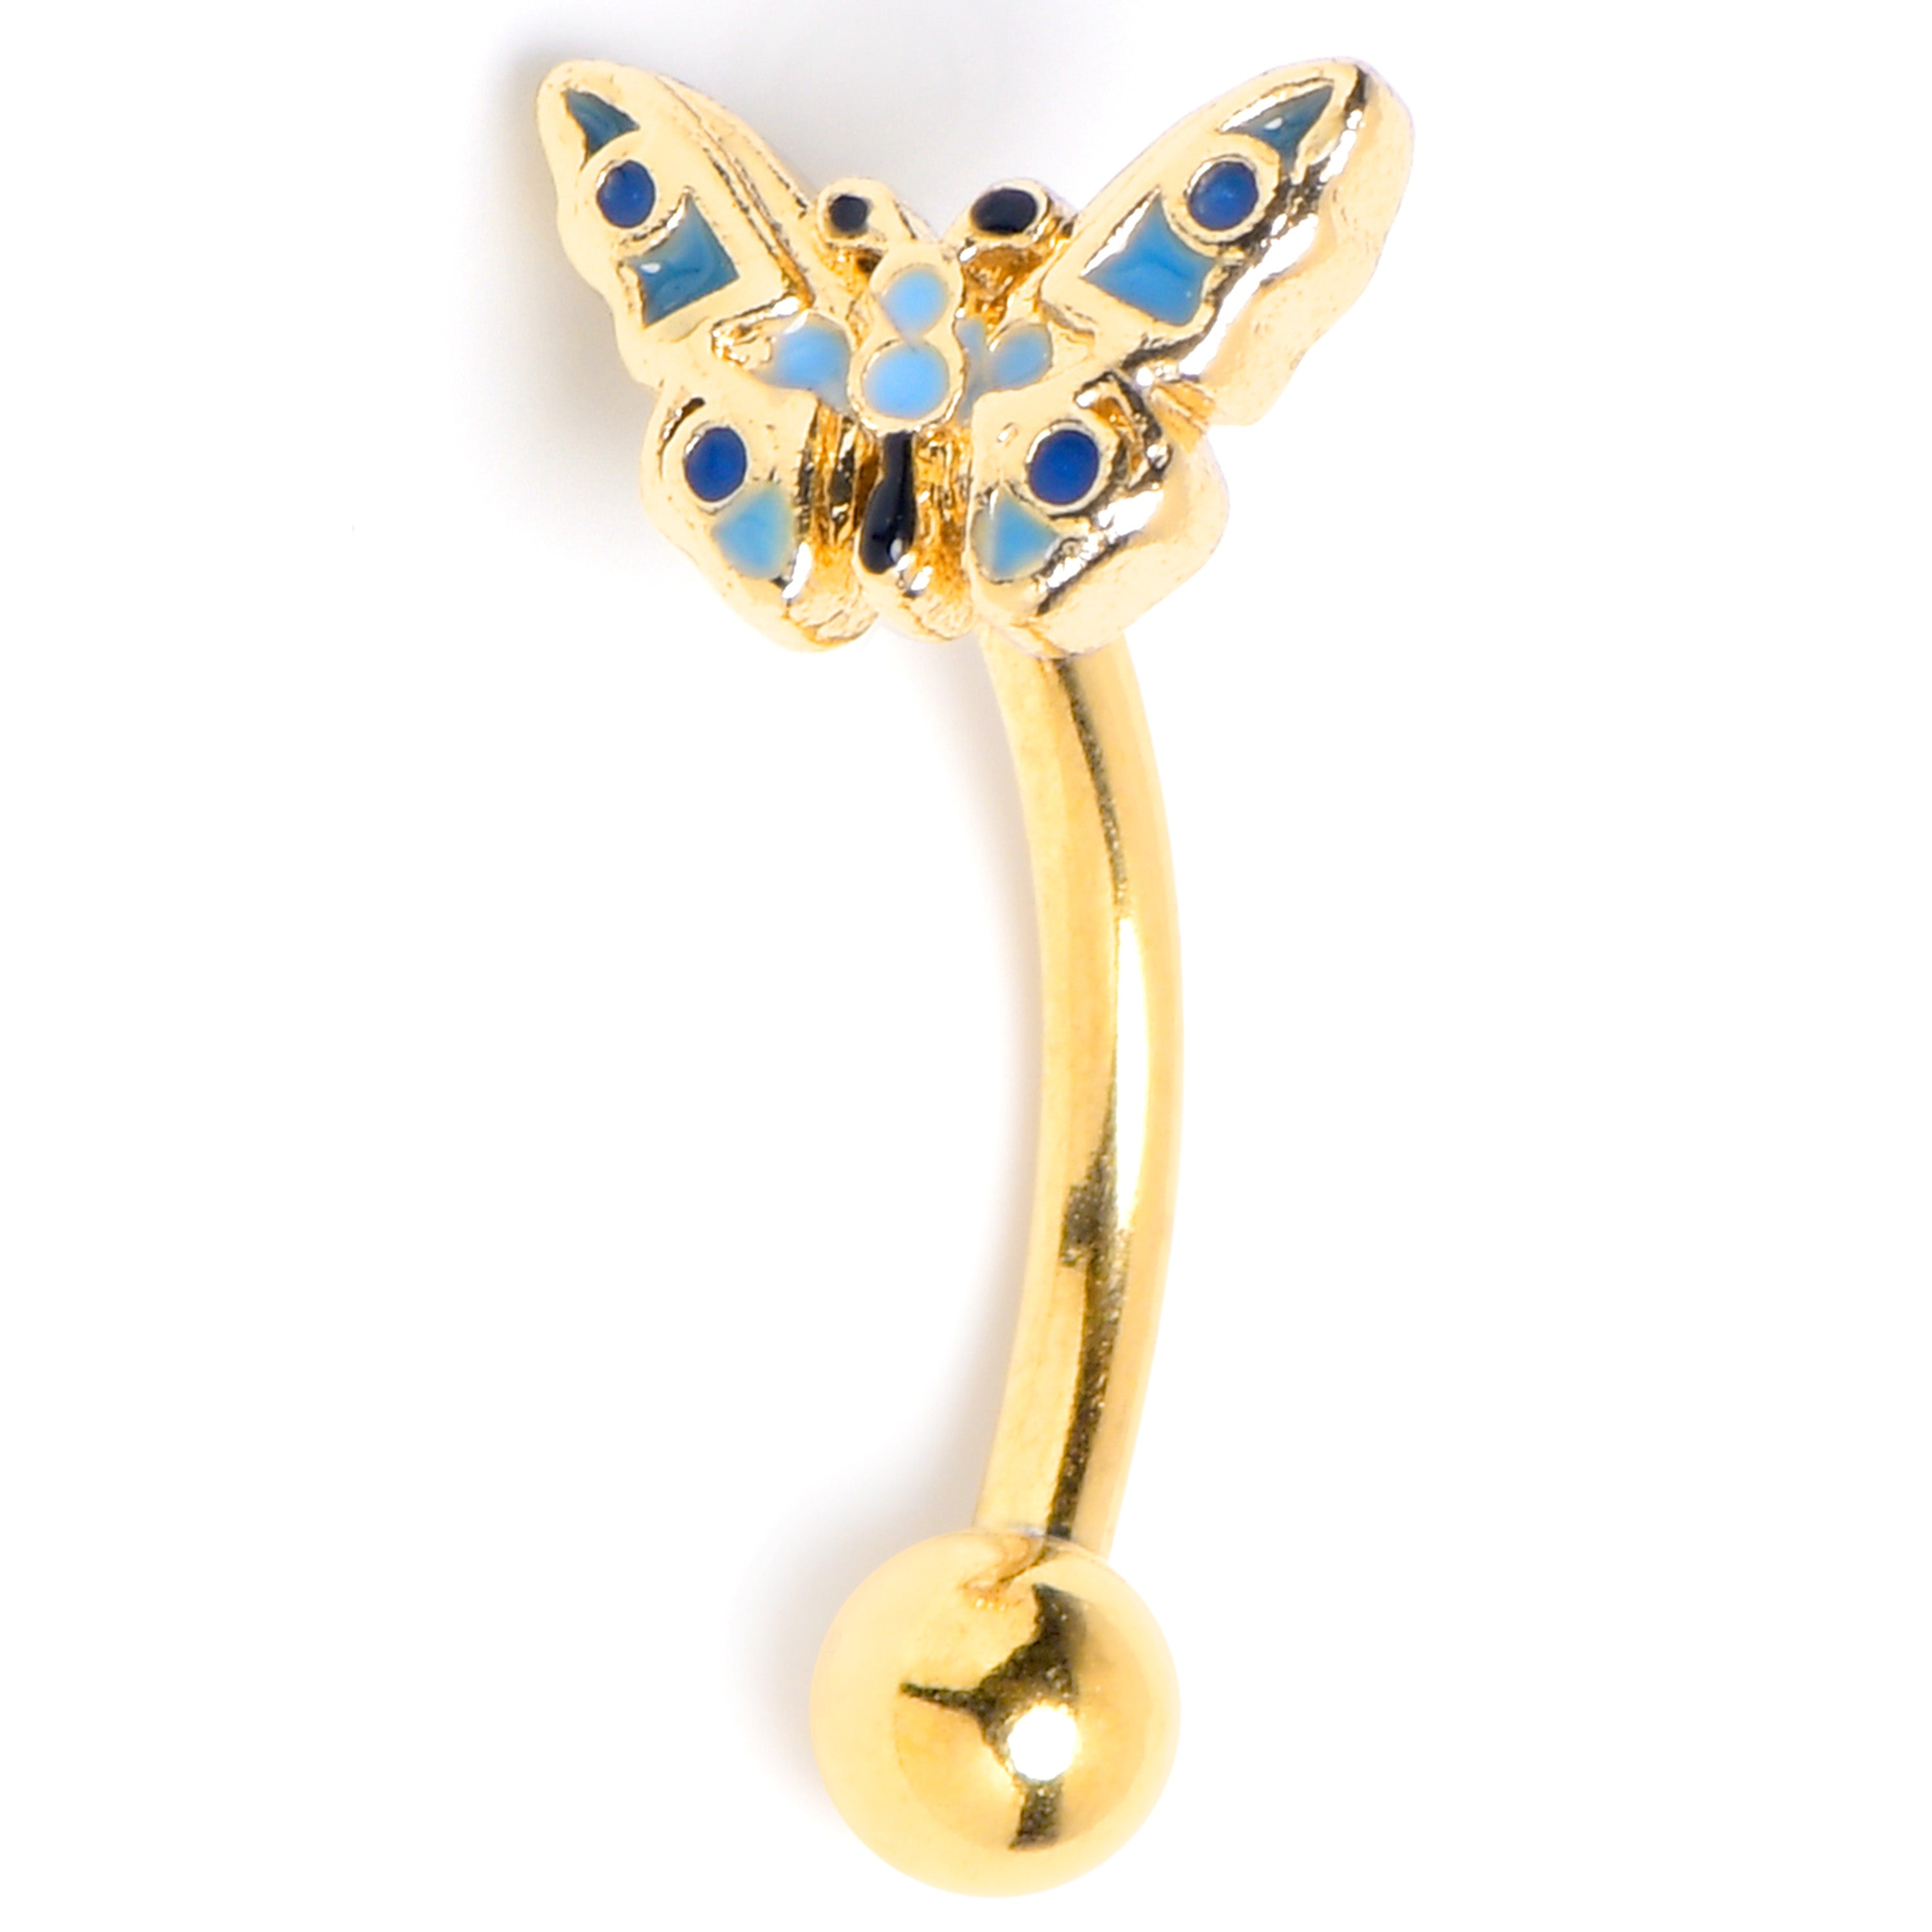 16 Gauge 5/16 Gold Tone Evening Butterfly Curved Eyebrow Ring